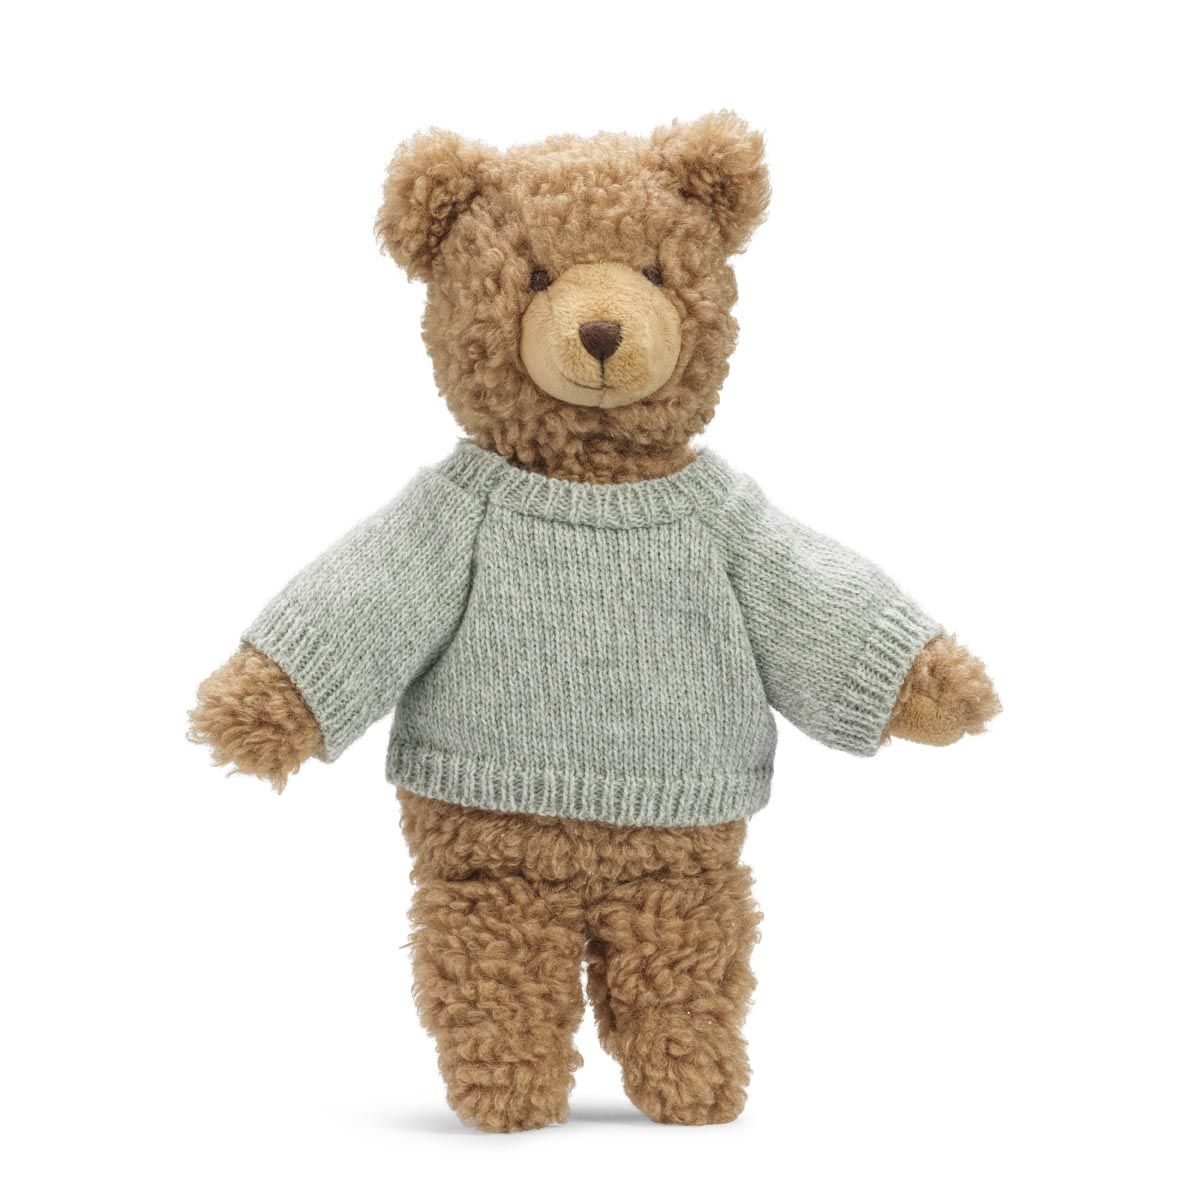 70370137858na-snuggle-billy-the-bear-front-aw22-pp